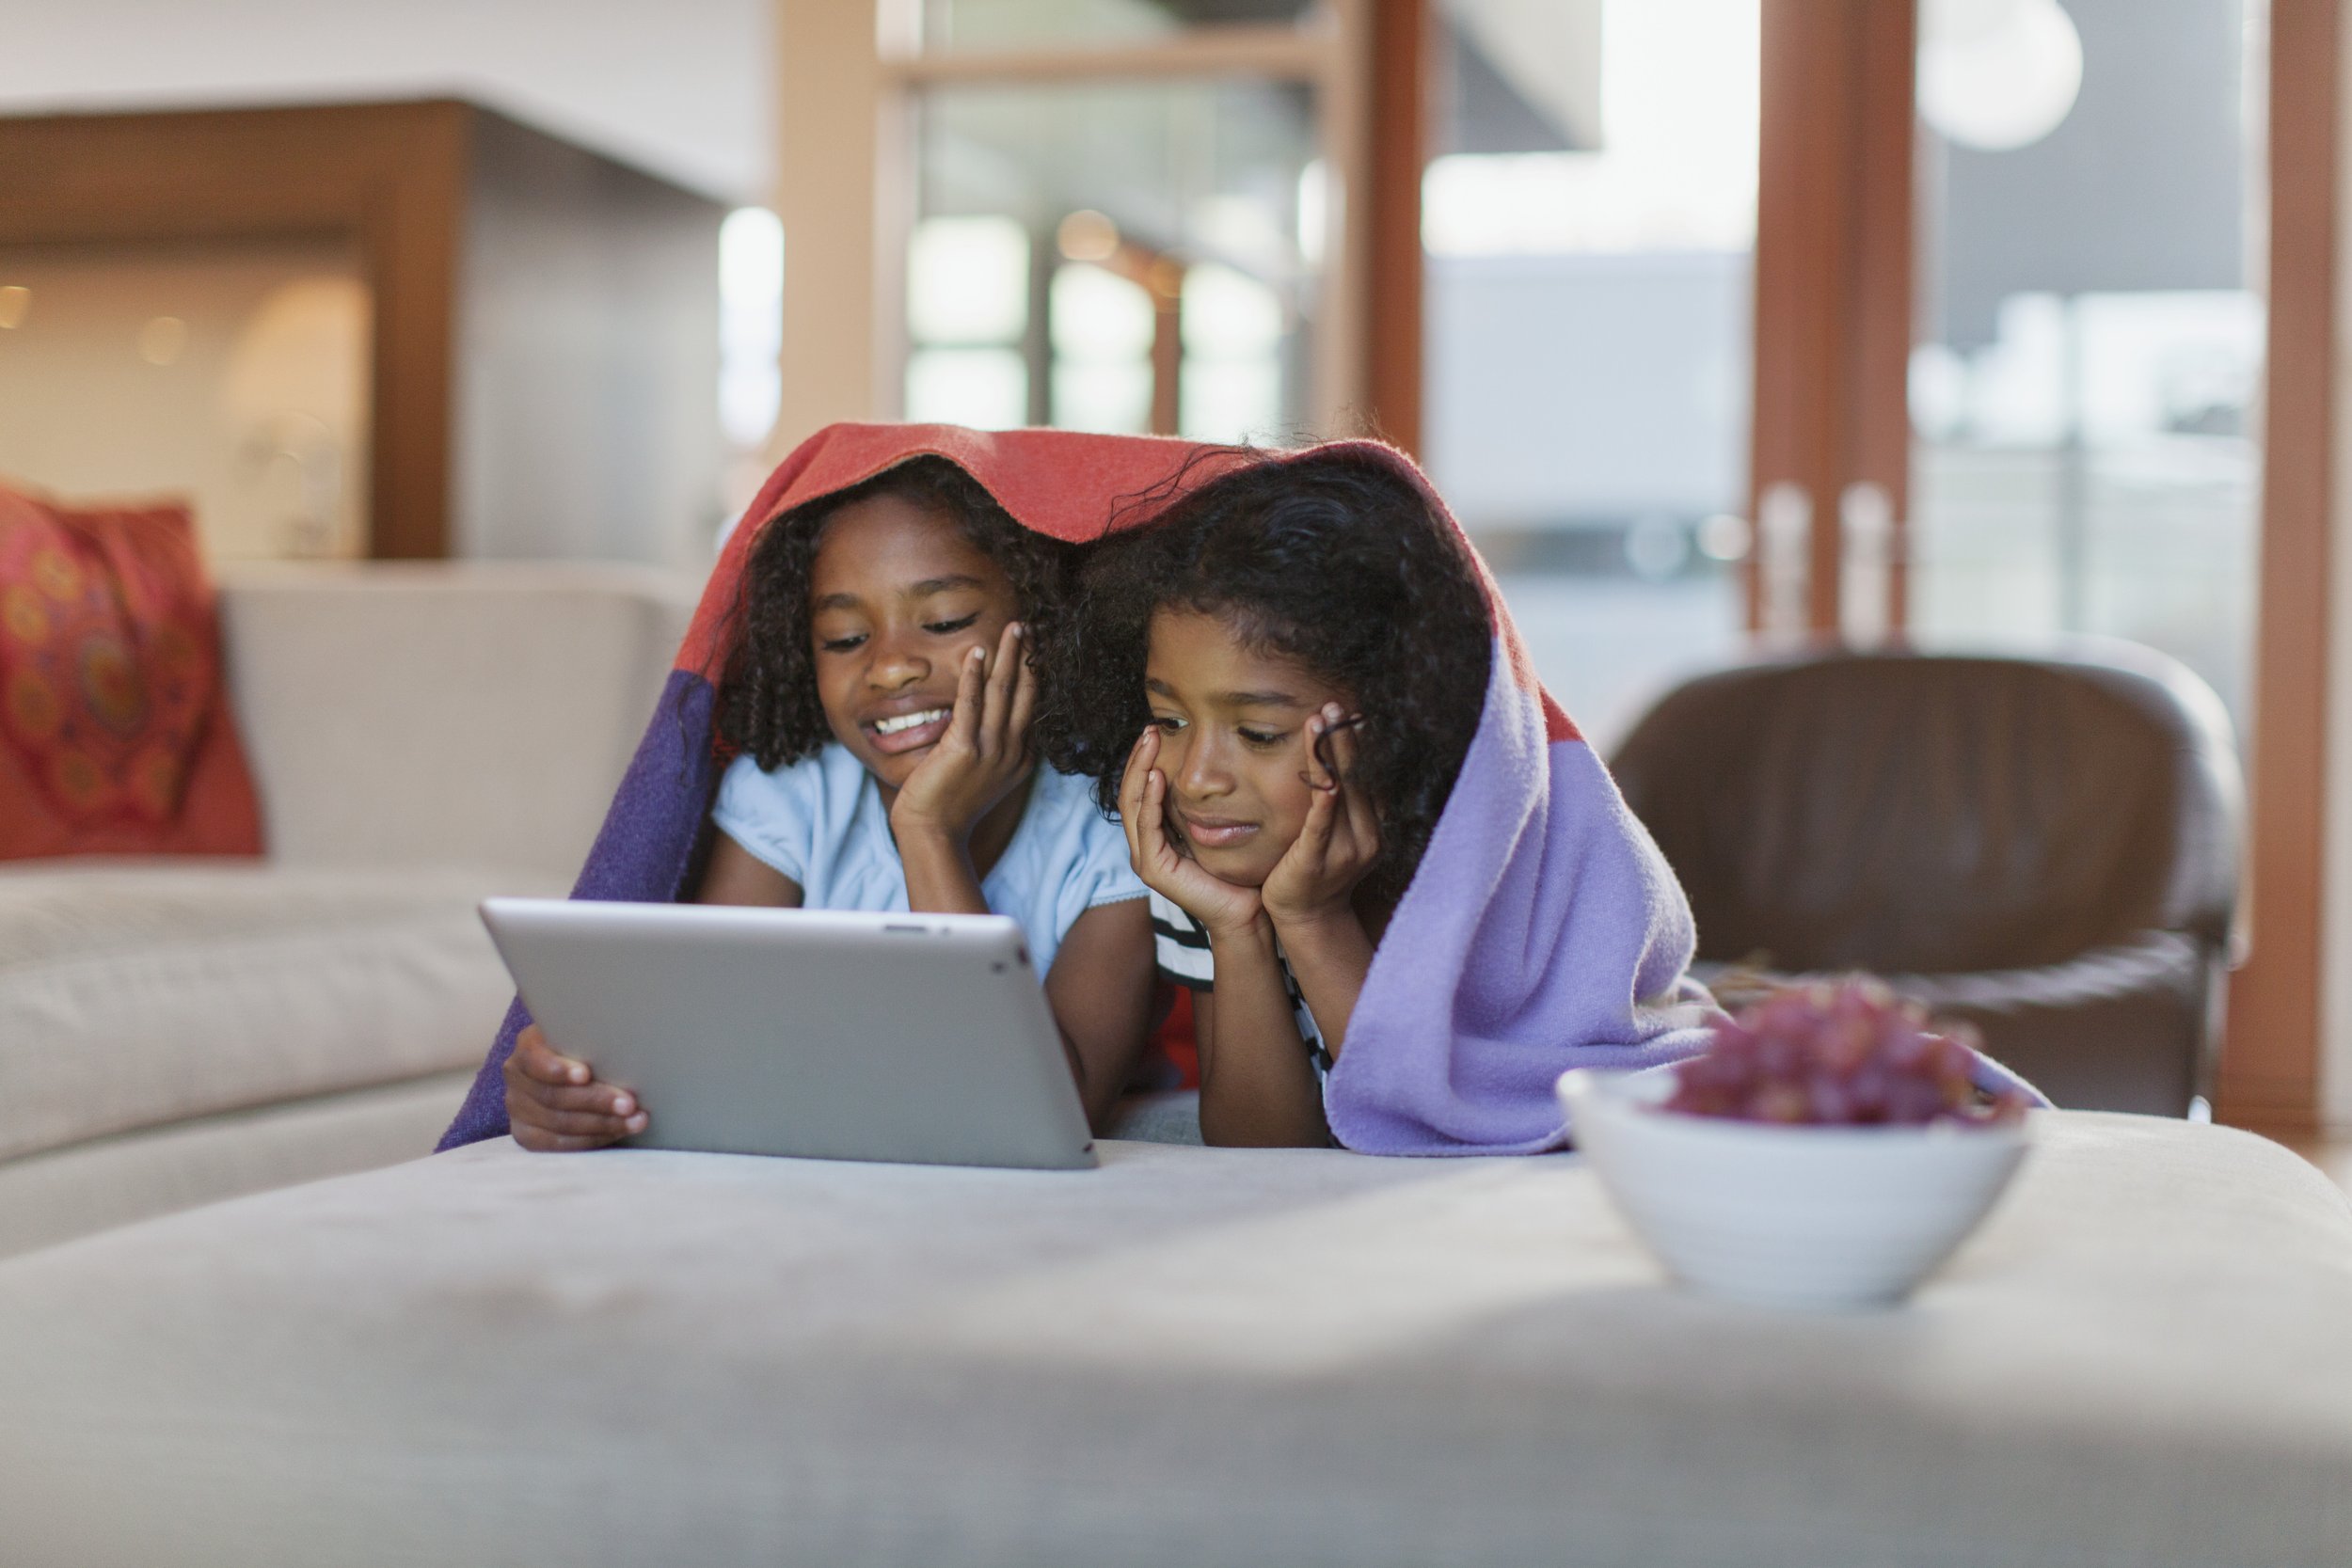 What Parents Need to Know About Video Game Streaming